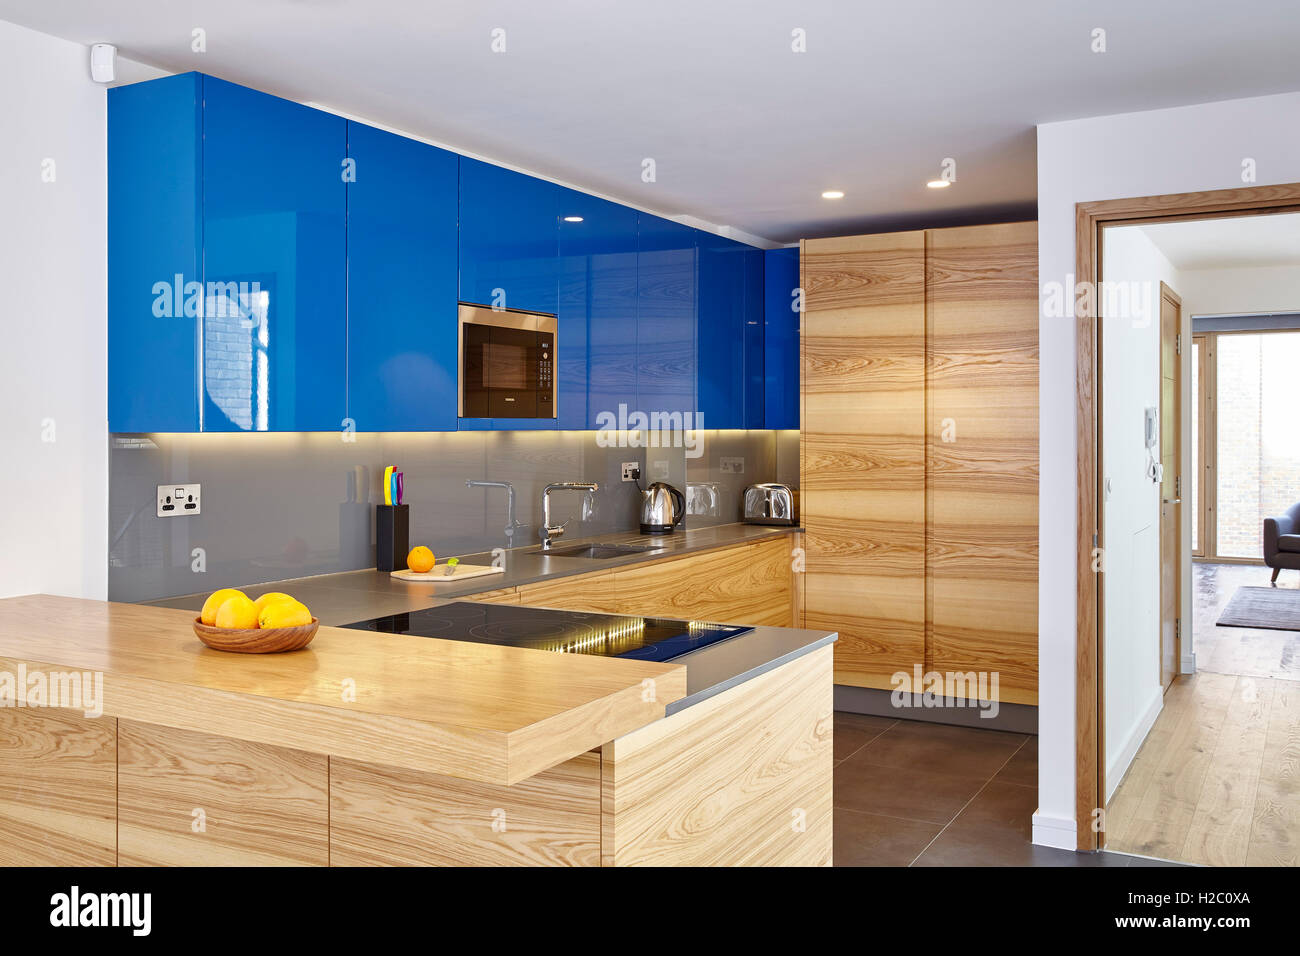 Kitchen area with blue cupboards and fruit. Peel Place, London, United Kingdom. Architect: Dexter Moren Associates, 2016. Stock Photo